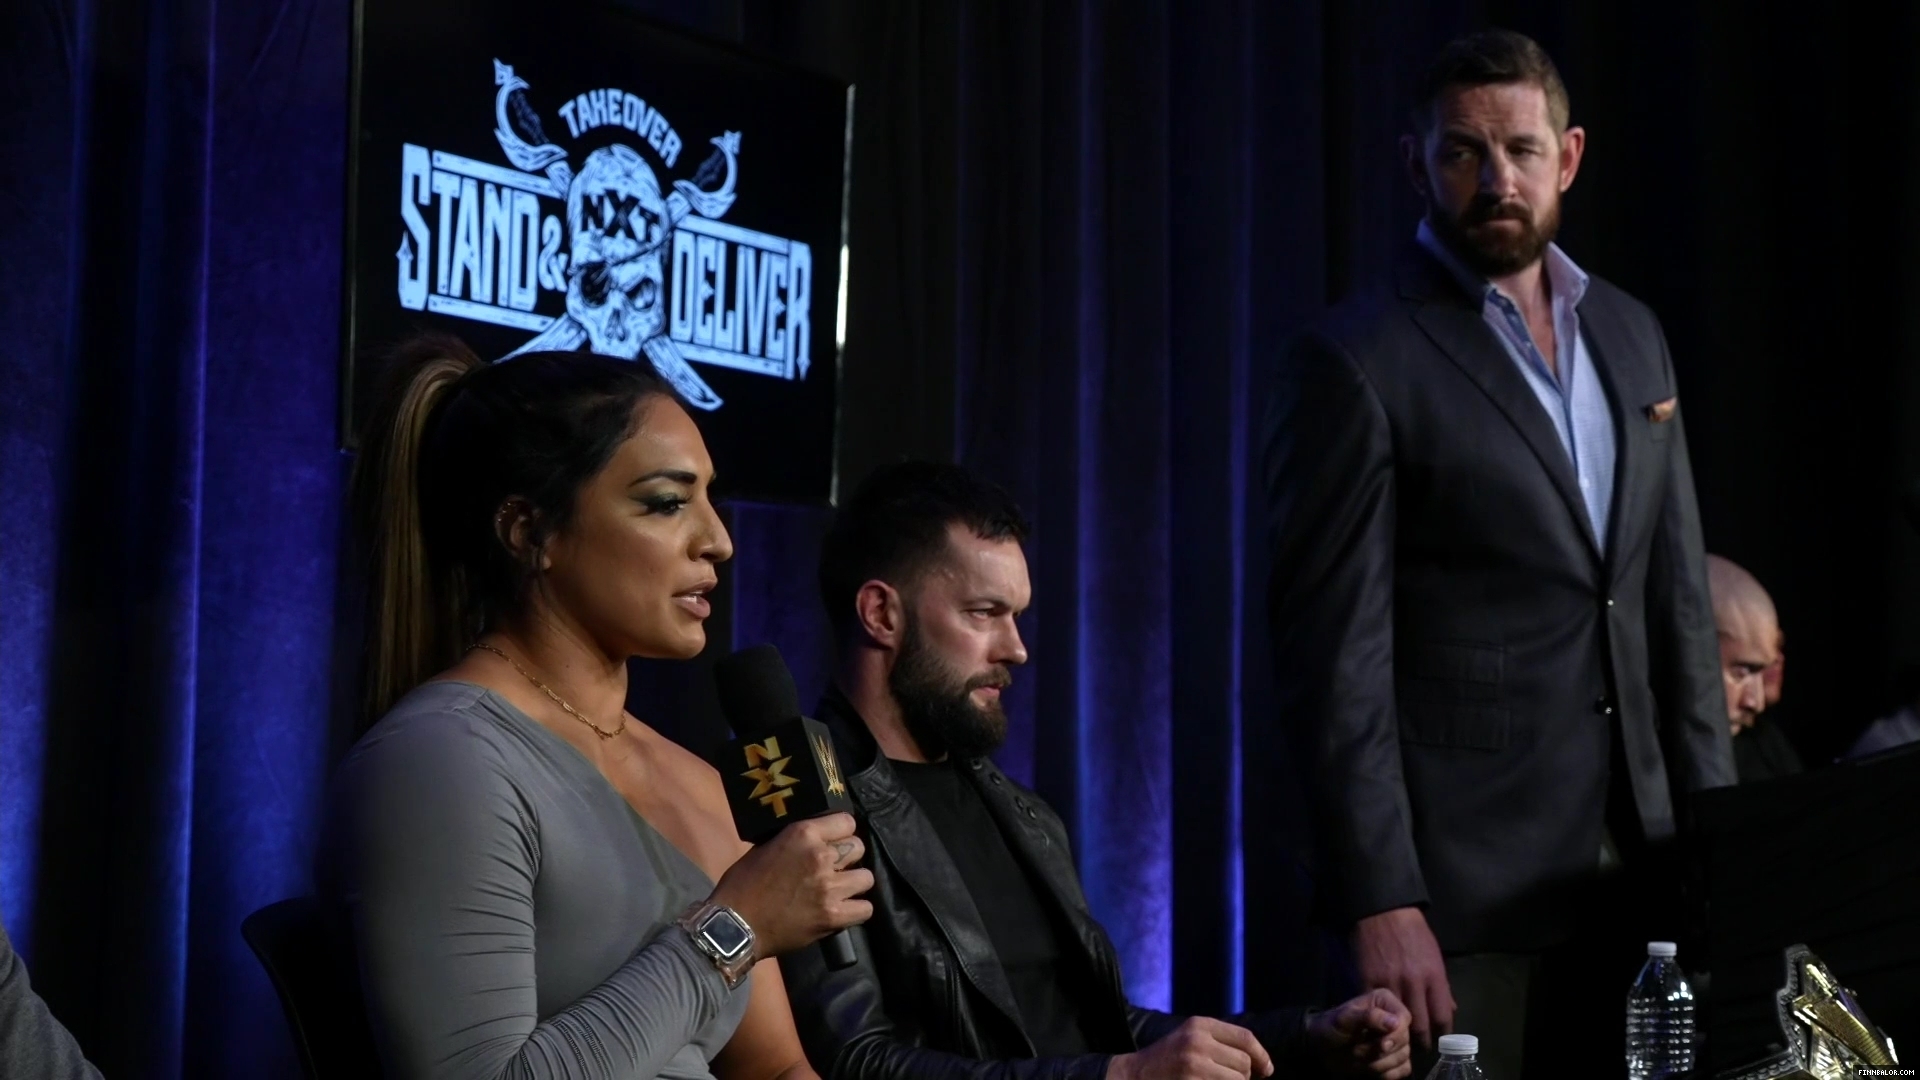 WWE_NXT_TakeOver_Stand_and_Deliver_2021_Global_Press_Conference_1080p_WEB_h264-HEEL_mp41966.jpg